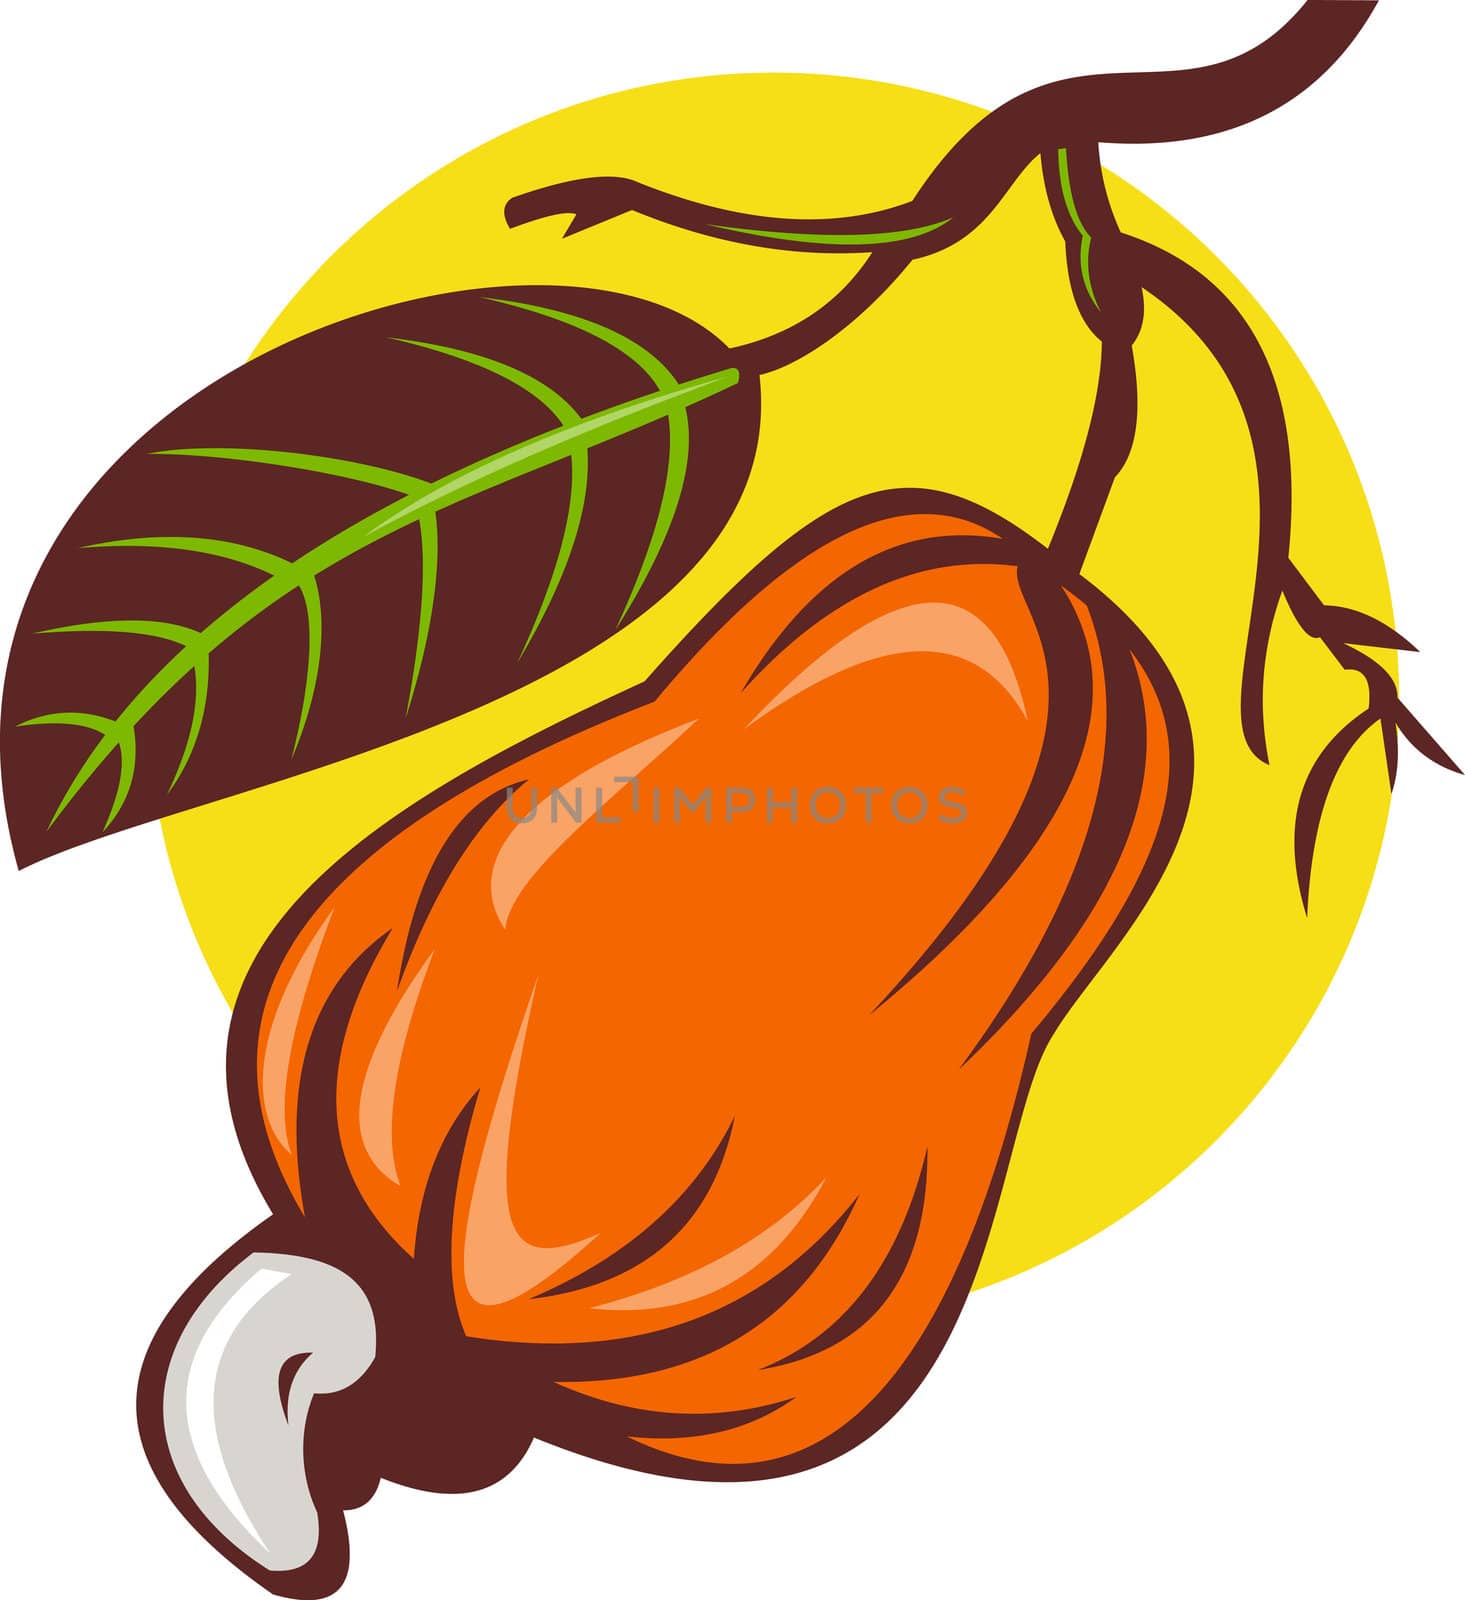 illustration of a cashew nut and fruit with leaf done in retro woodcut style isolated on white